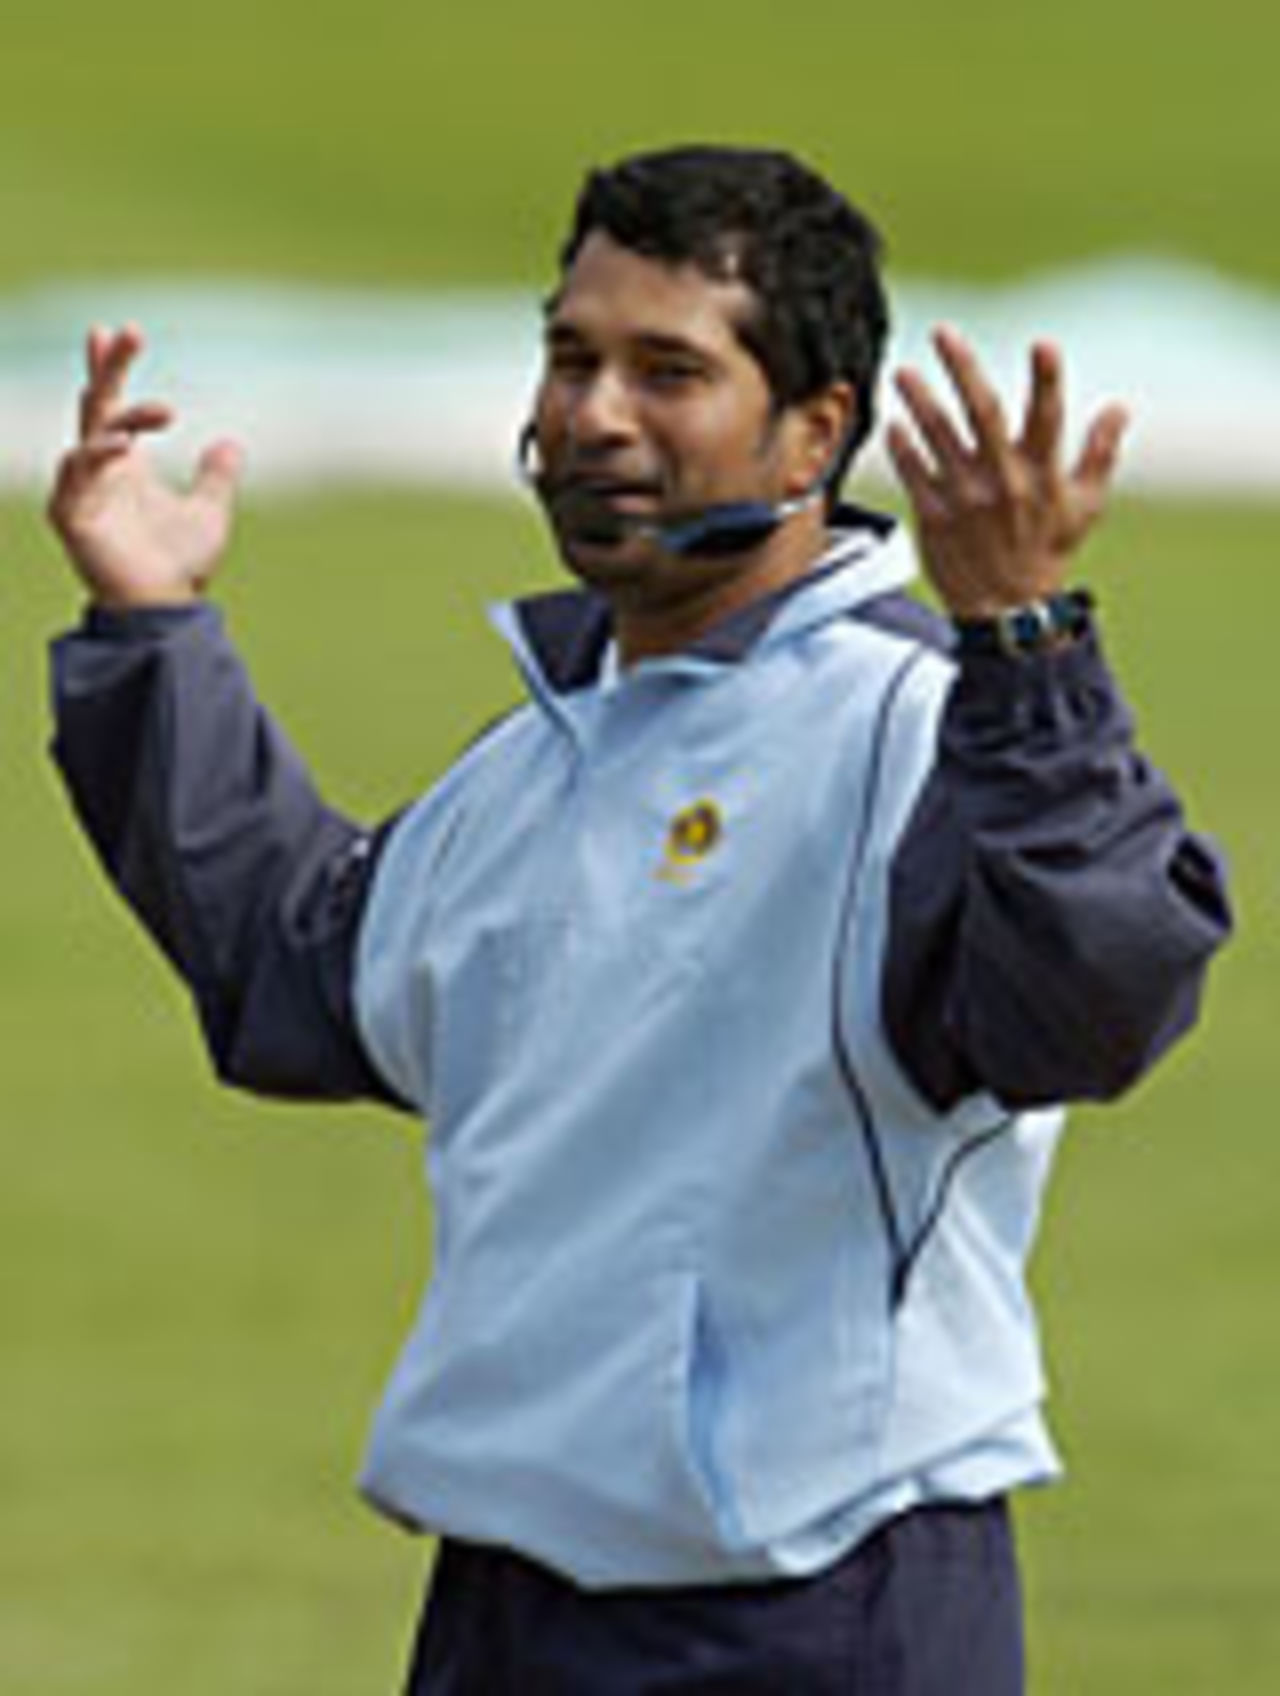 Sachin Tendulkar laughs after his sunglasses fell off while bowling, Nottingham, August 31, 2004